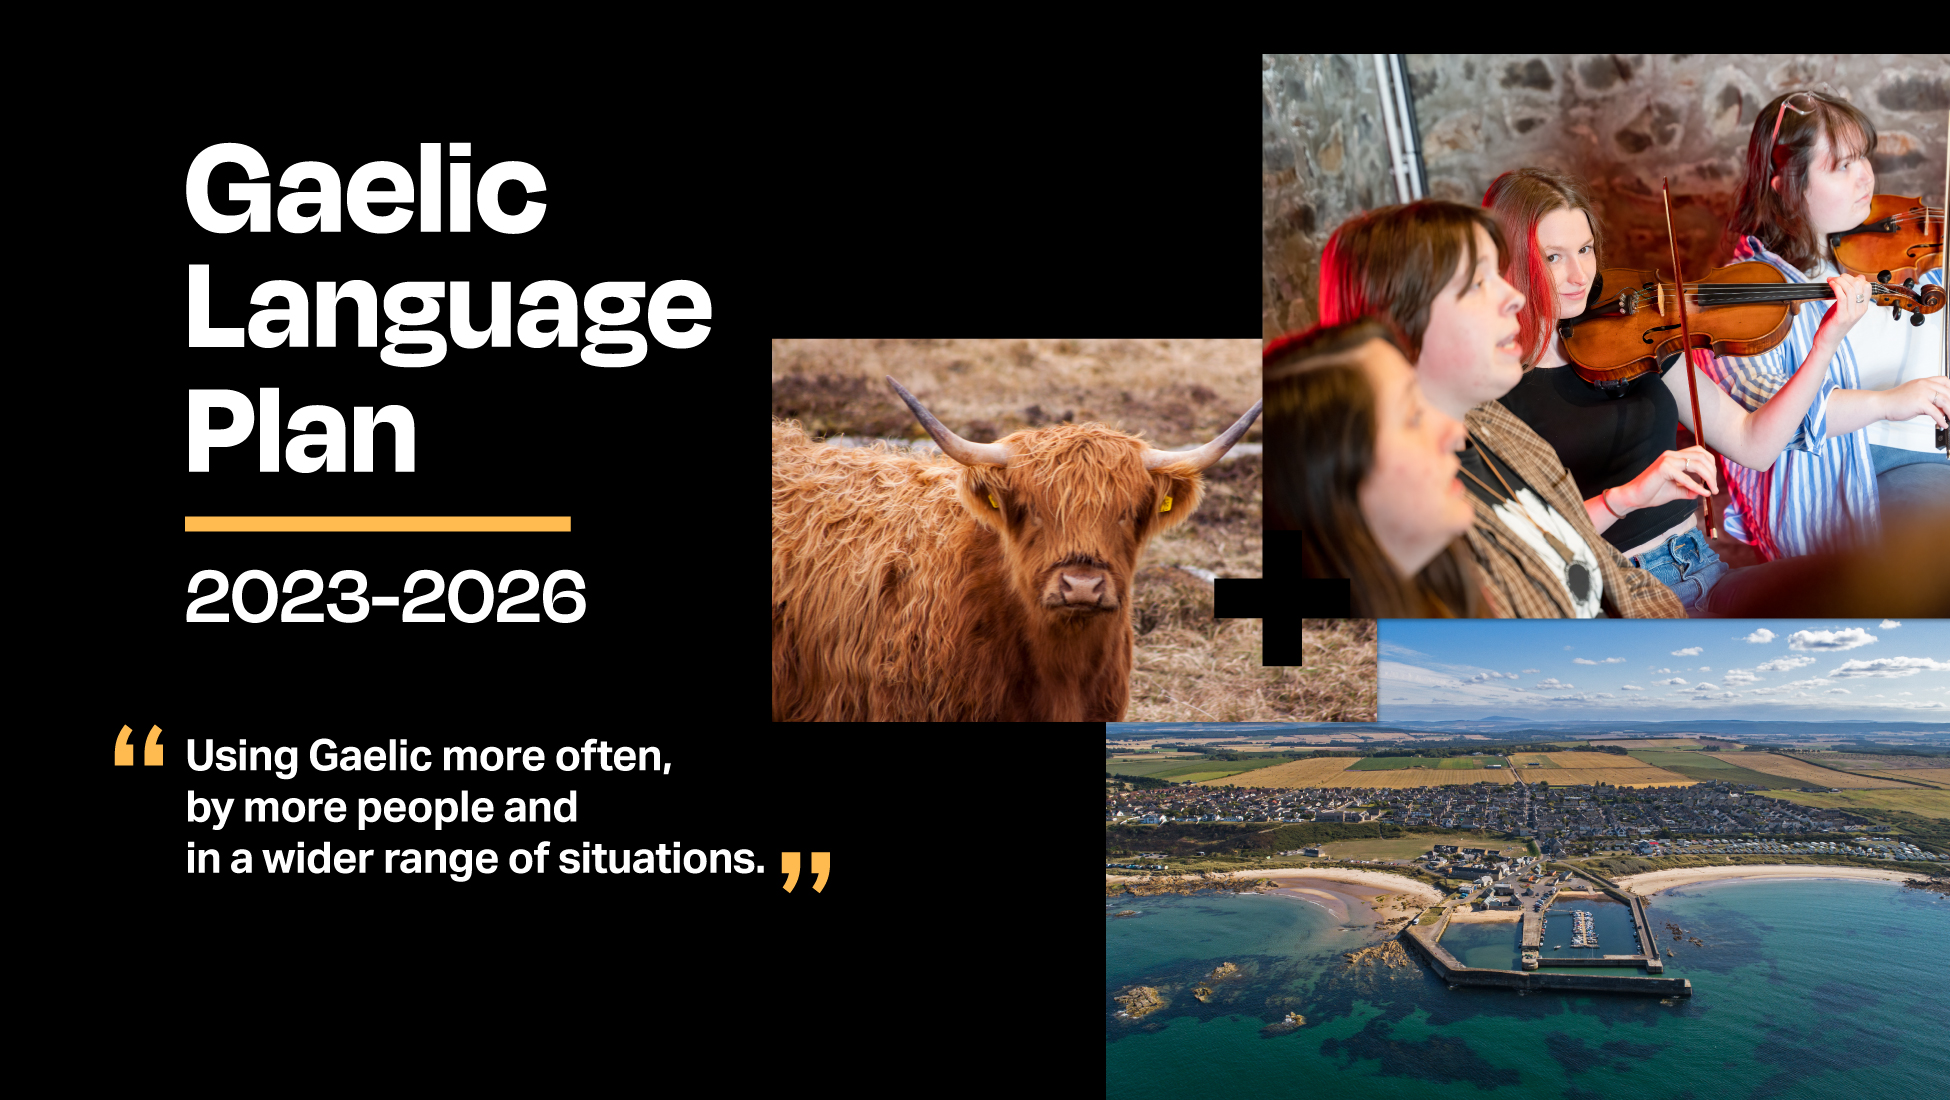 Gaelic language plan | 2023 2026 | Using Gaelic more often by more people and in a wider range of situations | 3 photos collage with UHI SMO student playing violin | a highland coo | Landscape of Hopeman Moray